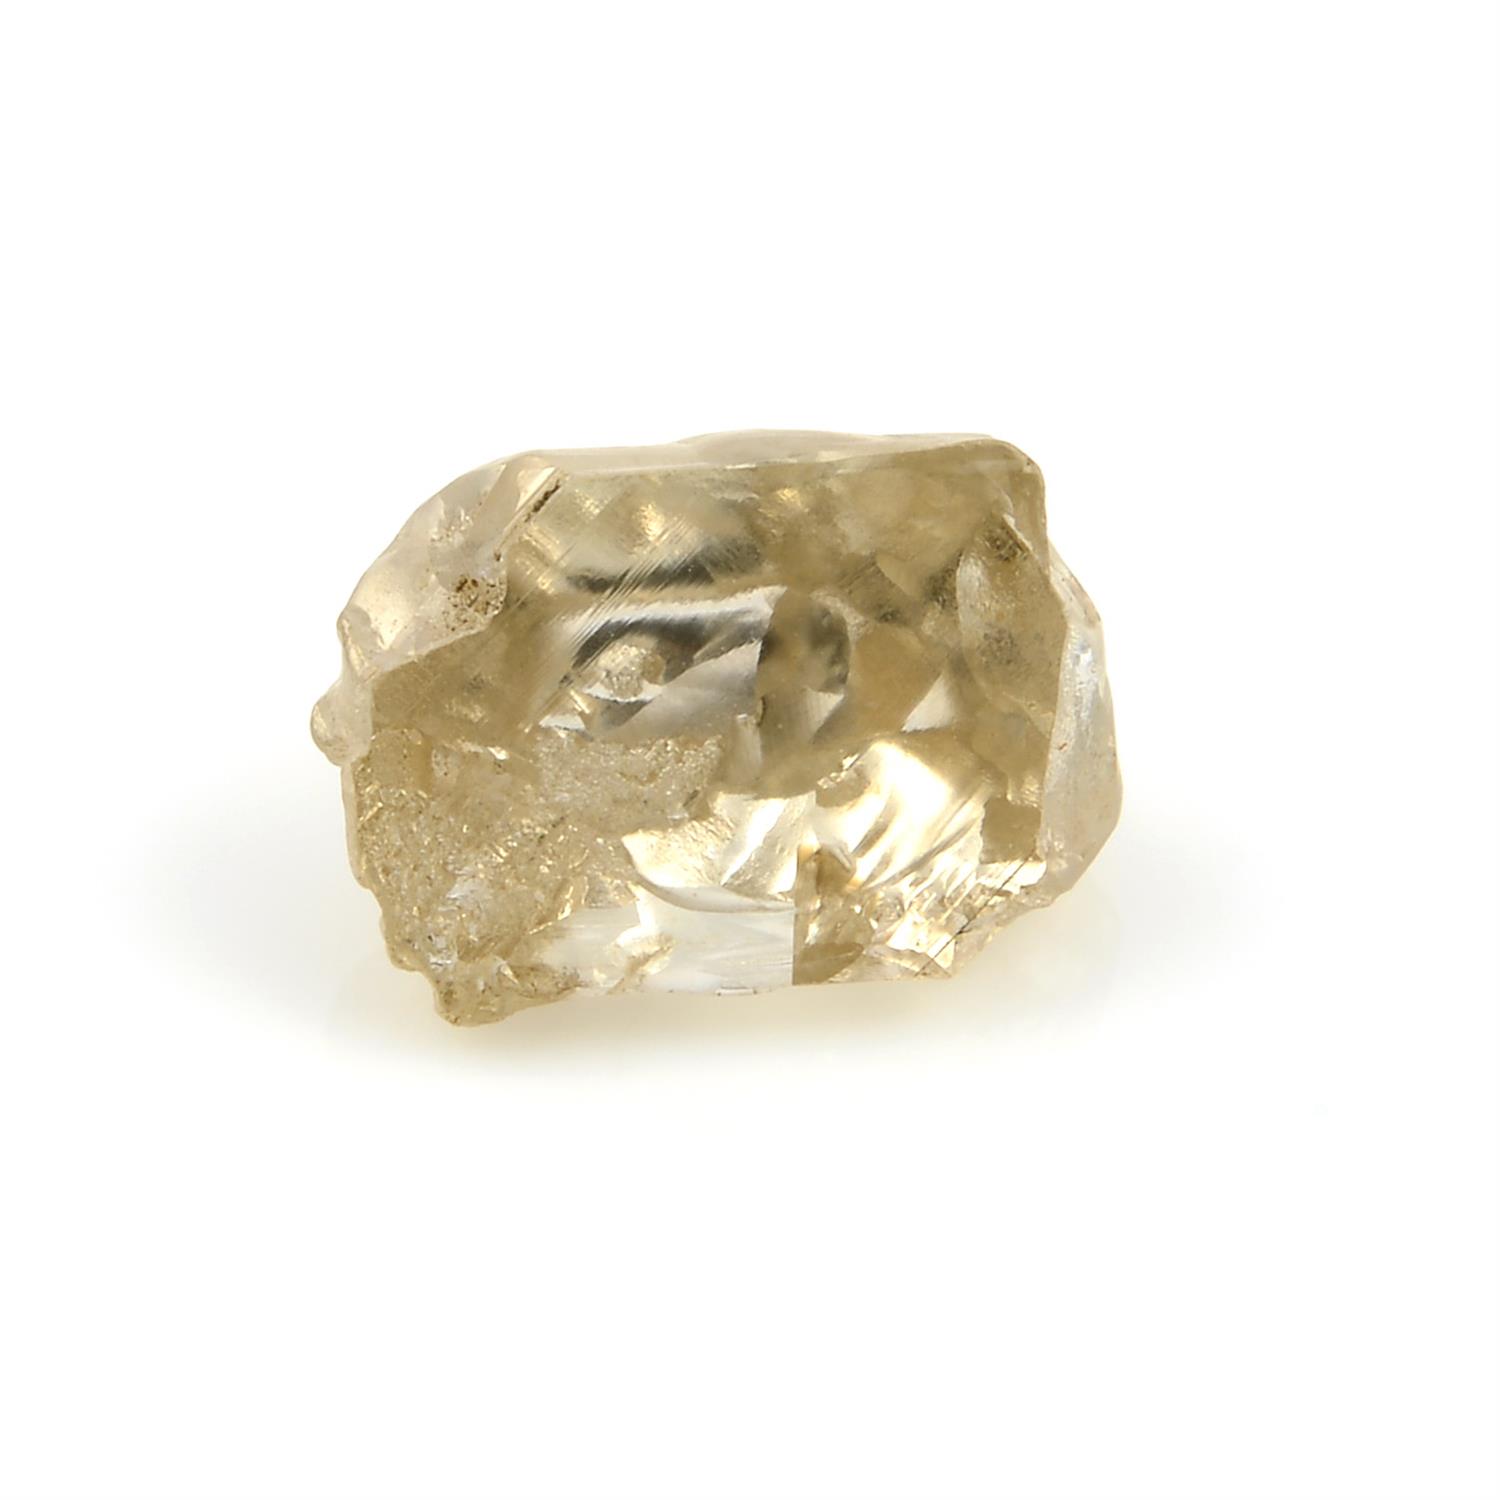 A rough diamond, weighing 1.05ct - Image 2 of 2